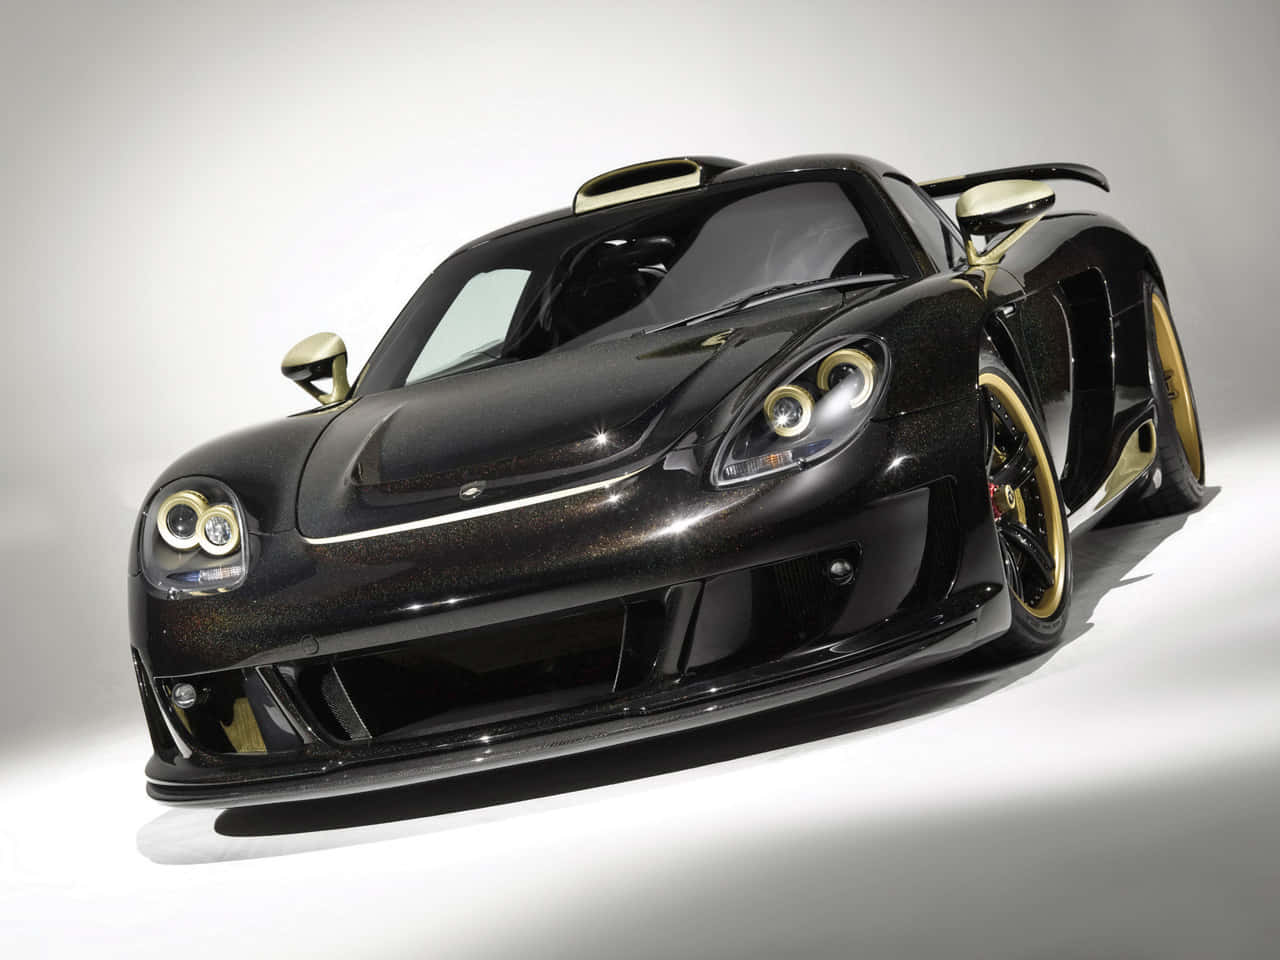 A Black And Gold Sports Car Is Shown In A Studio